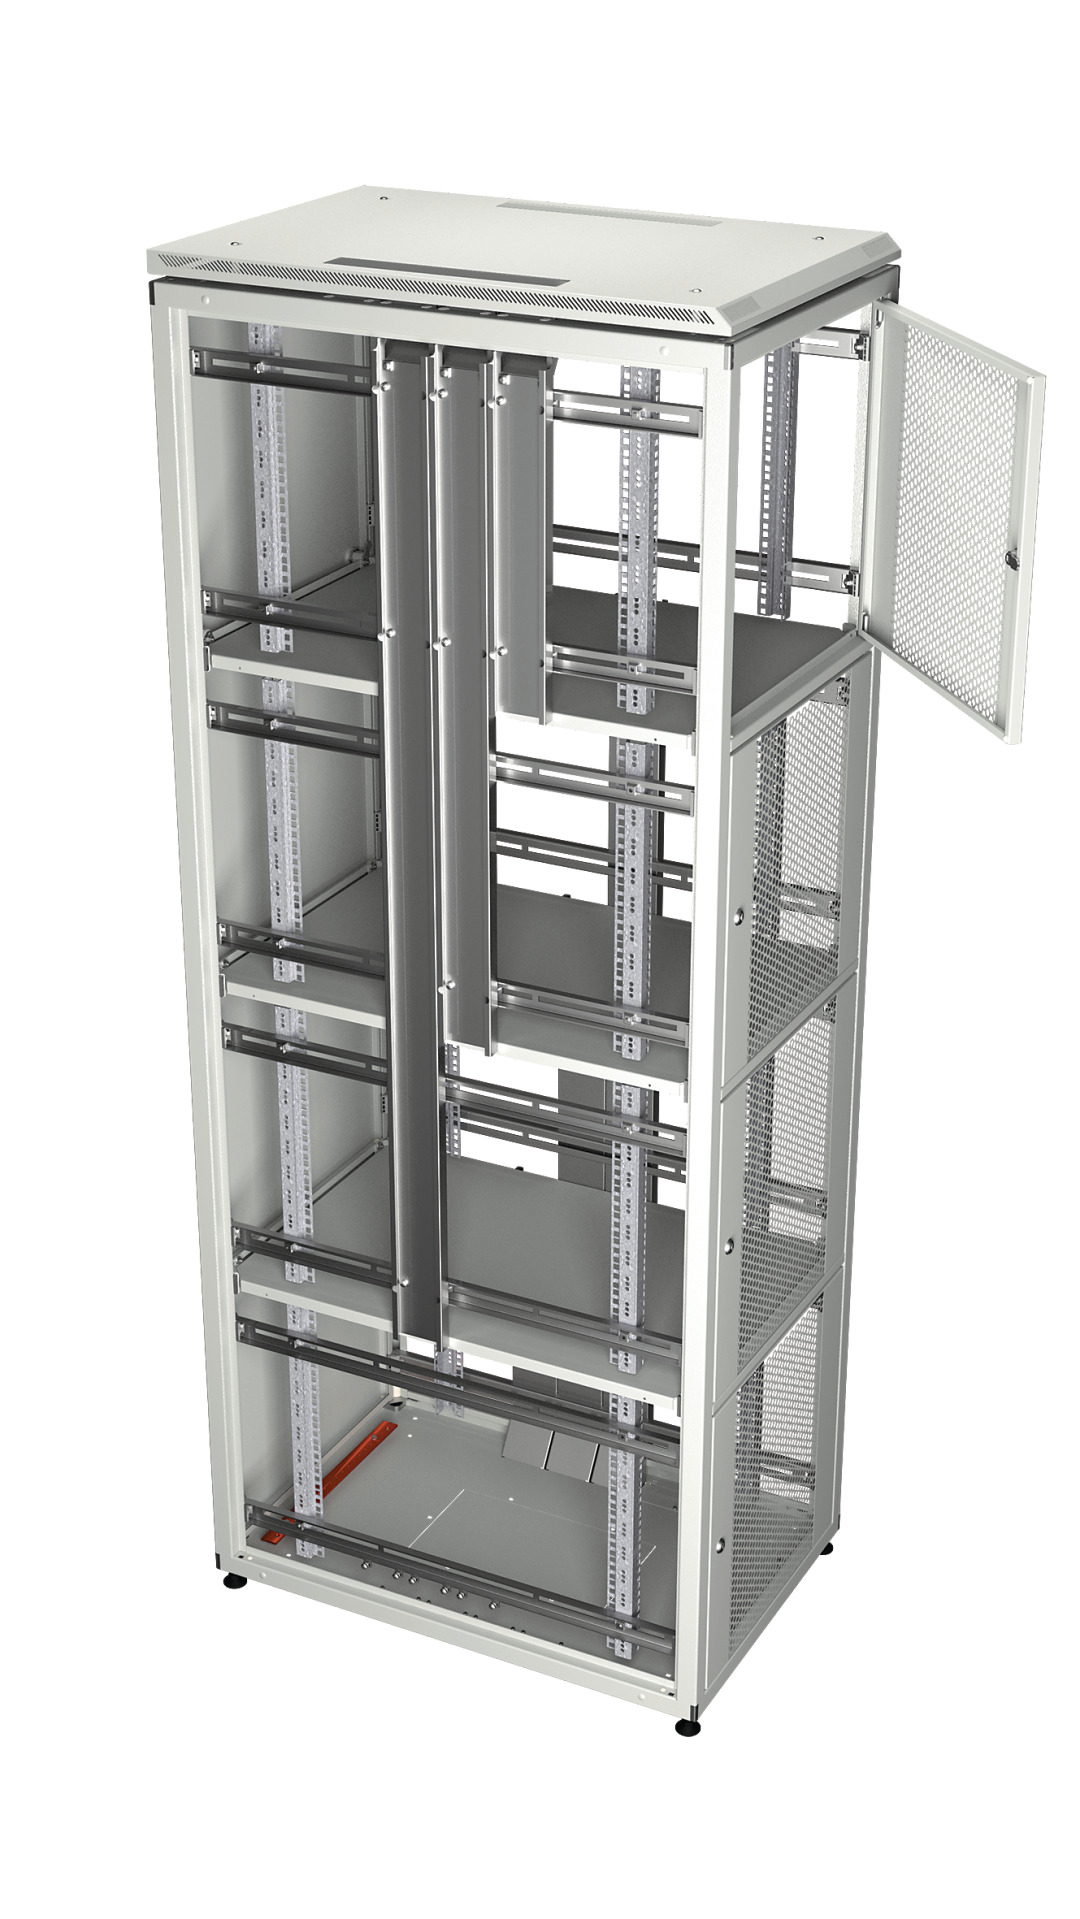 Co-Location Rack PRO, 1x23+2x11HE, 600x1000 mm, F+R 1-tlg. perforiert, RAL7035